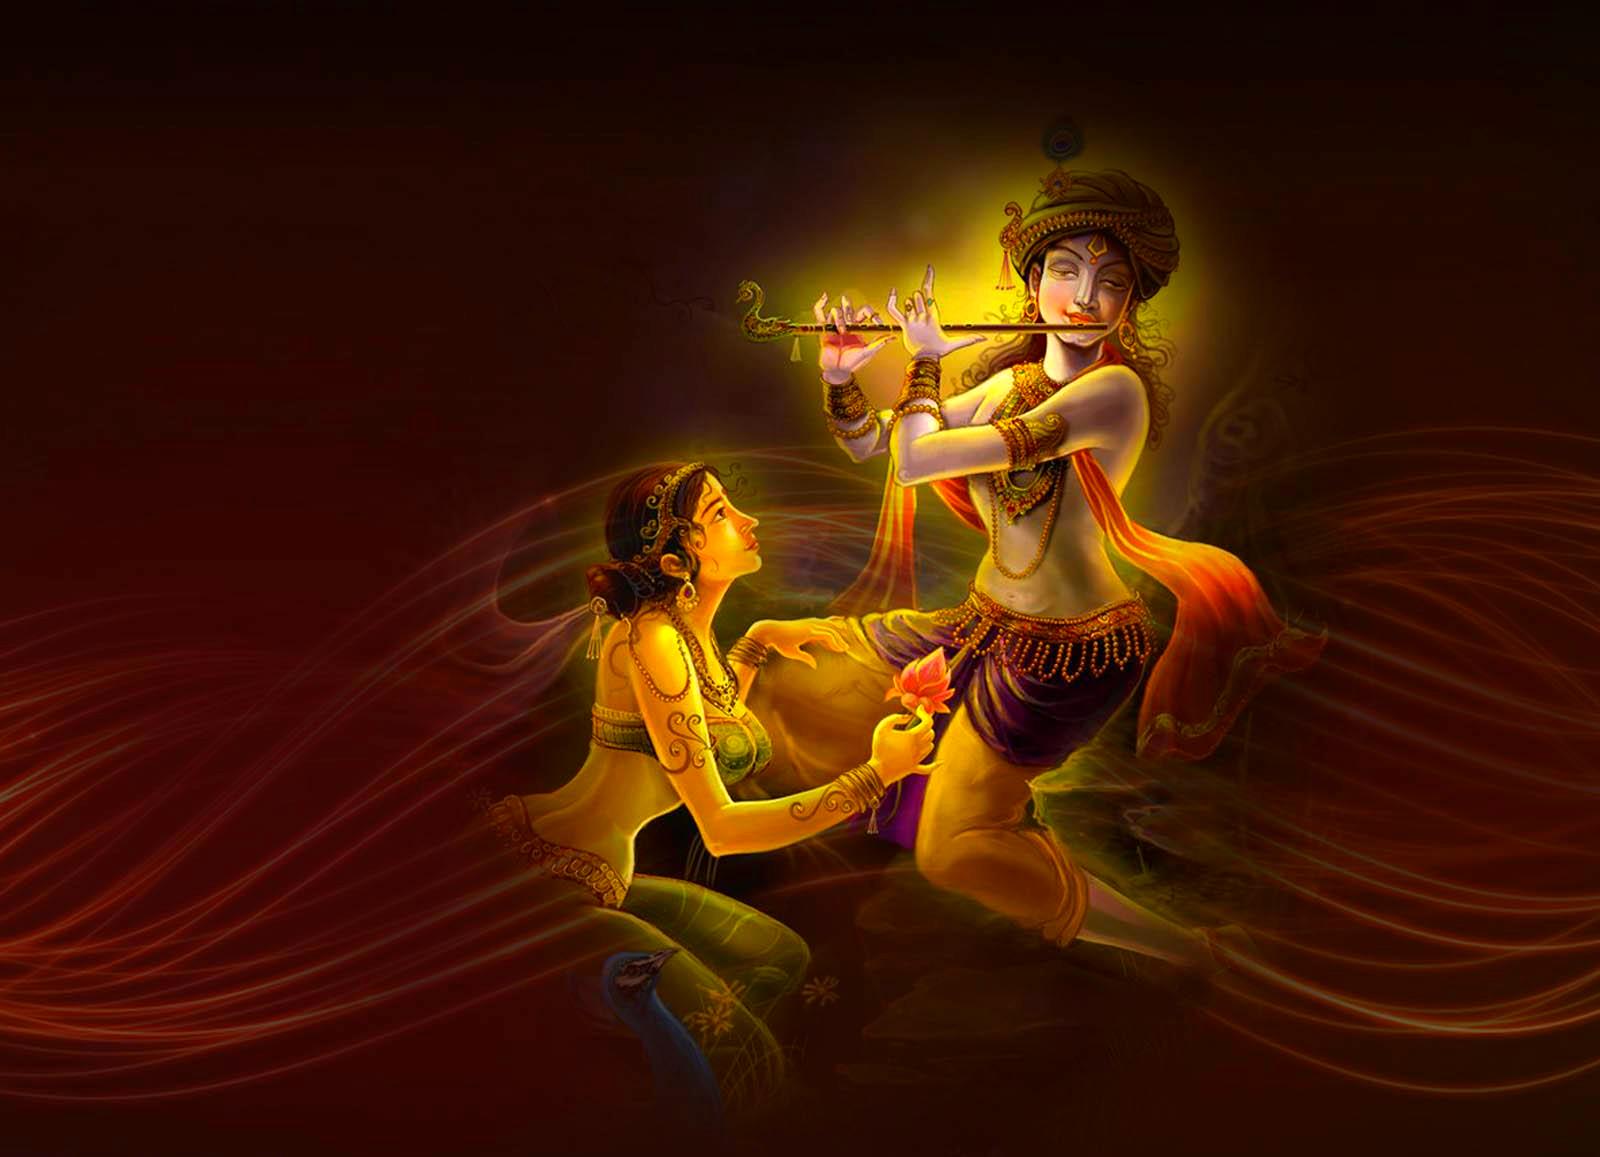 Awesome Pic Of Lord Krishna - HD Wallpaper 